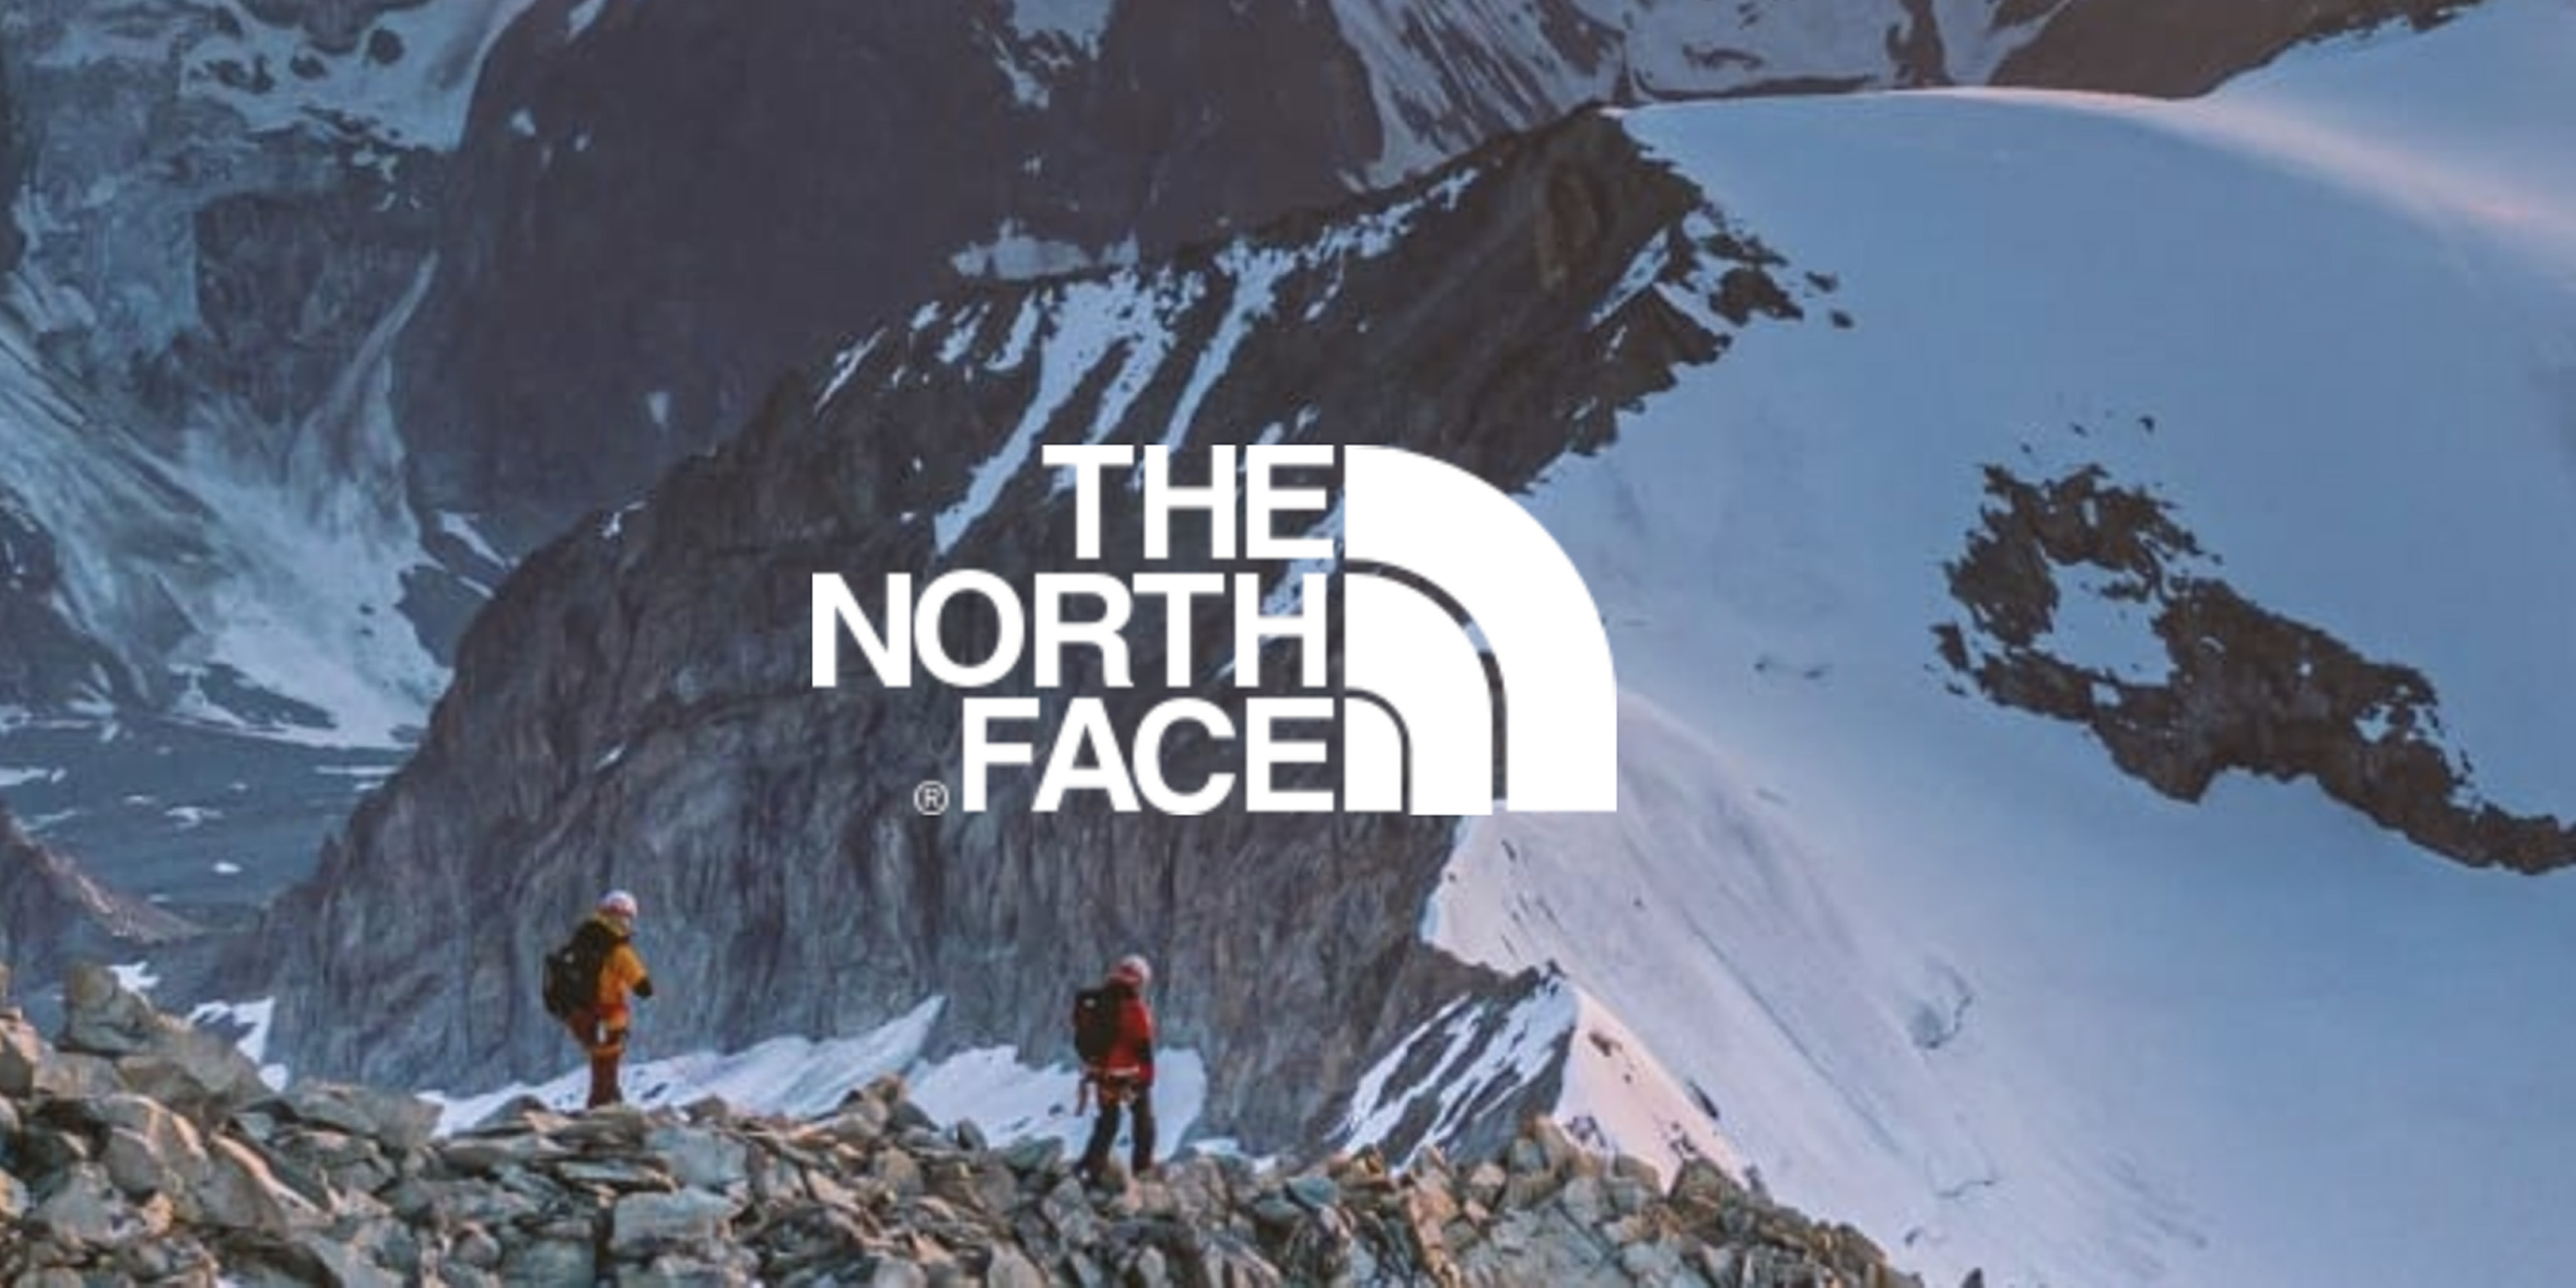 The North FaceBrand HD Wallpapers Preview  10wallpapercom